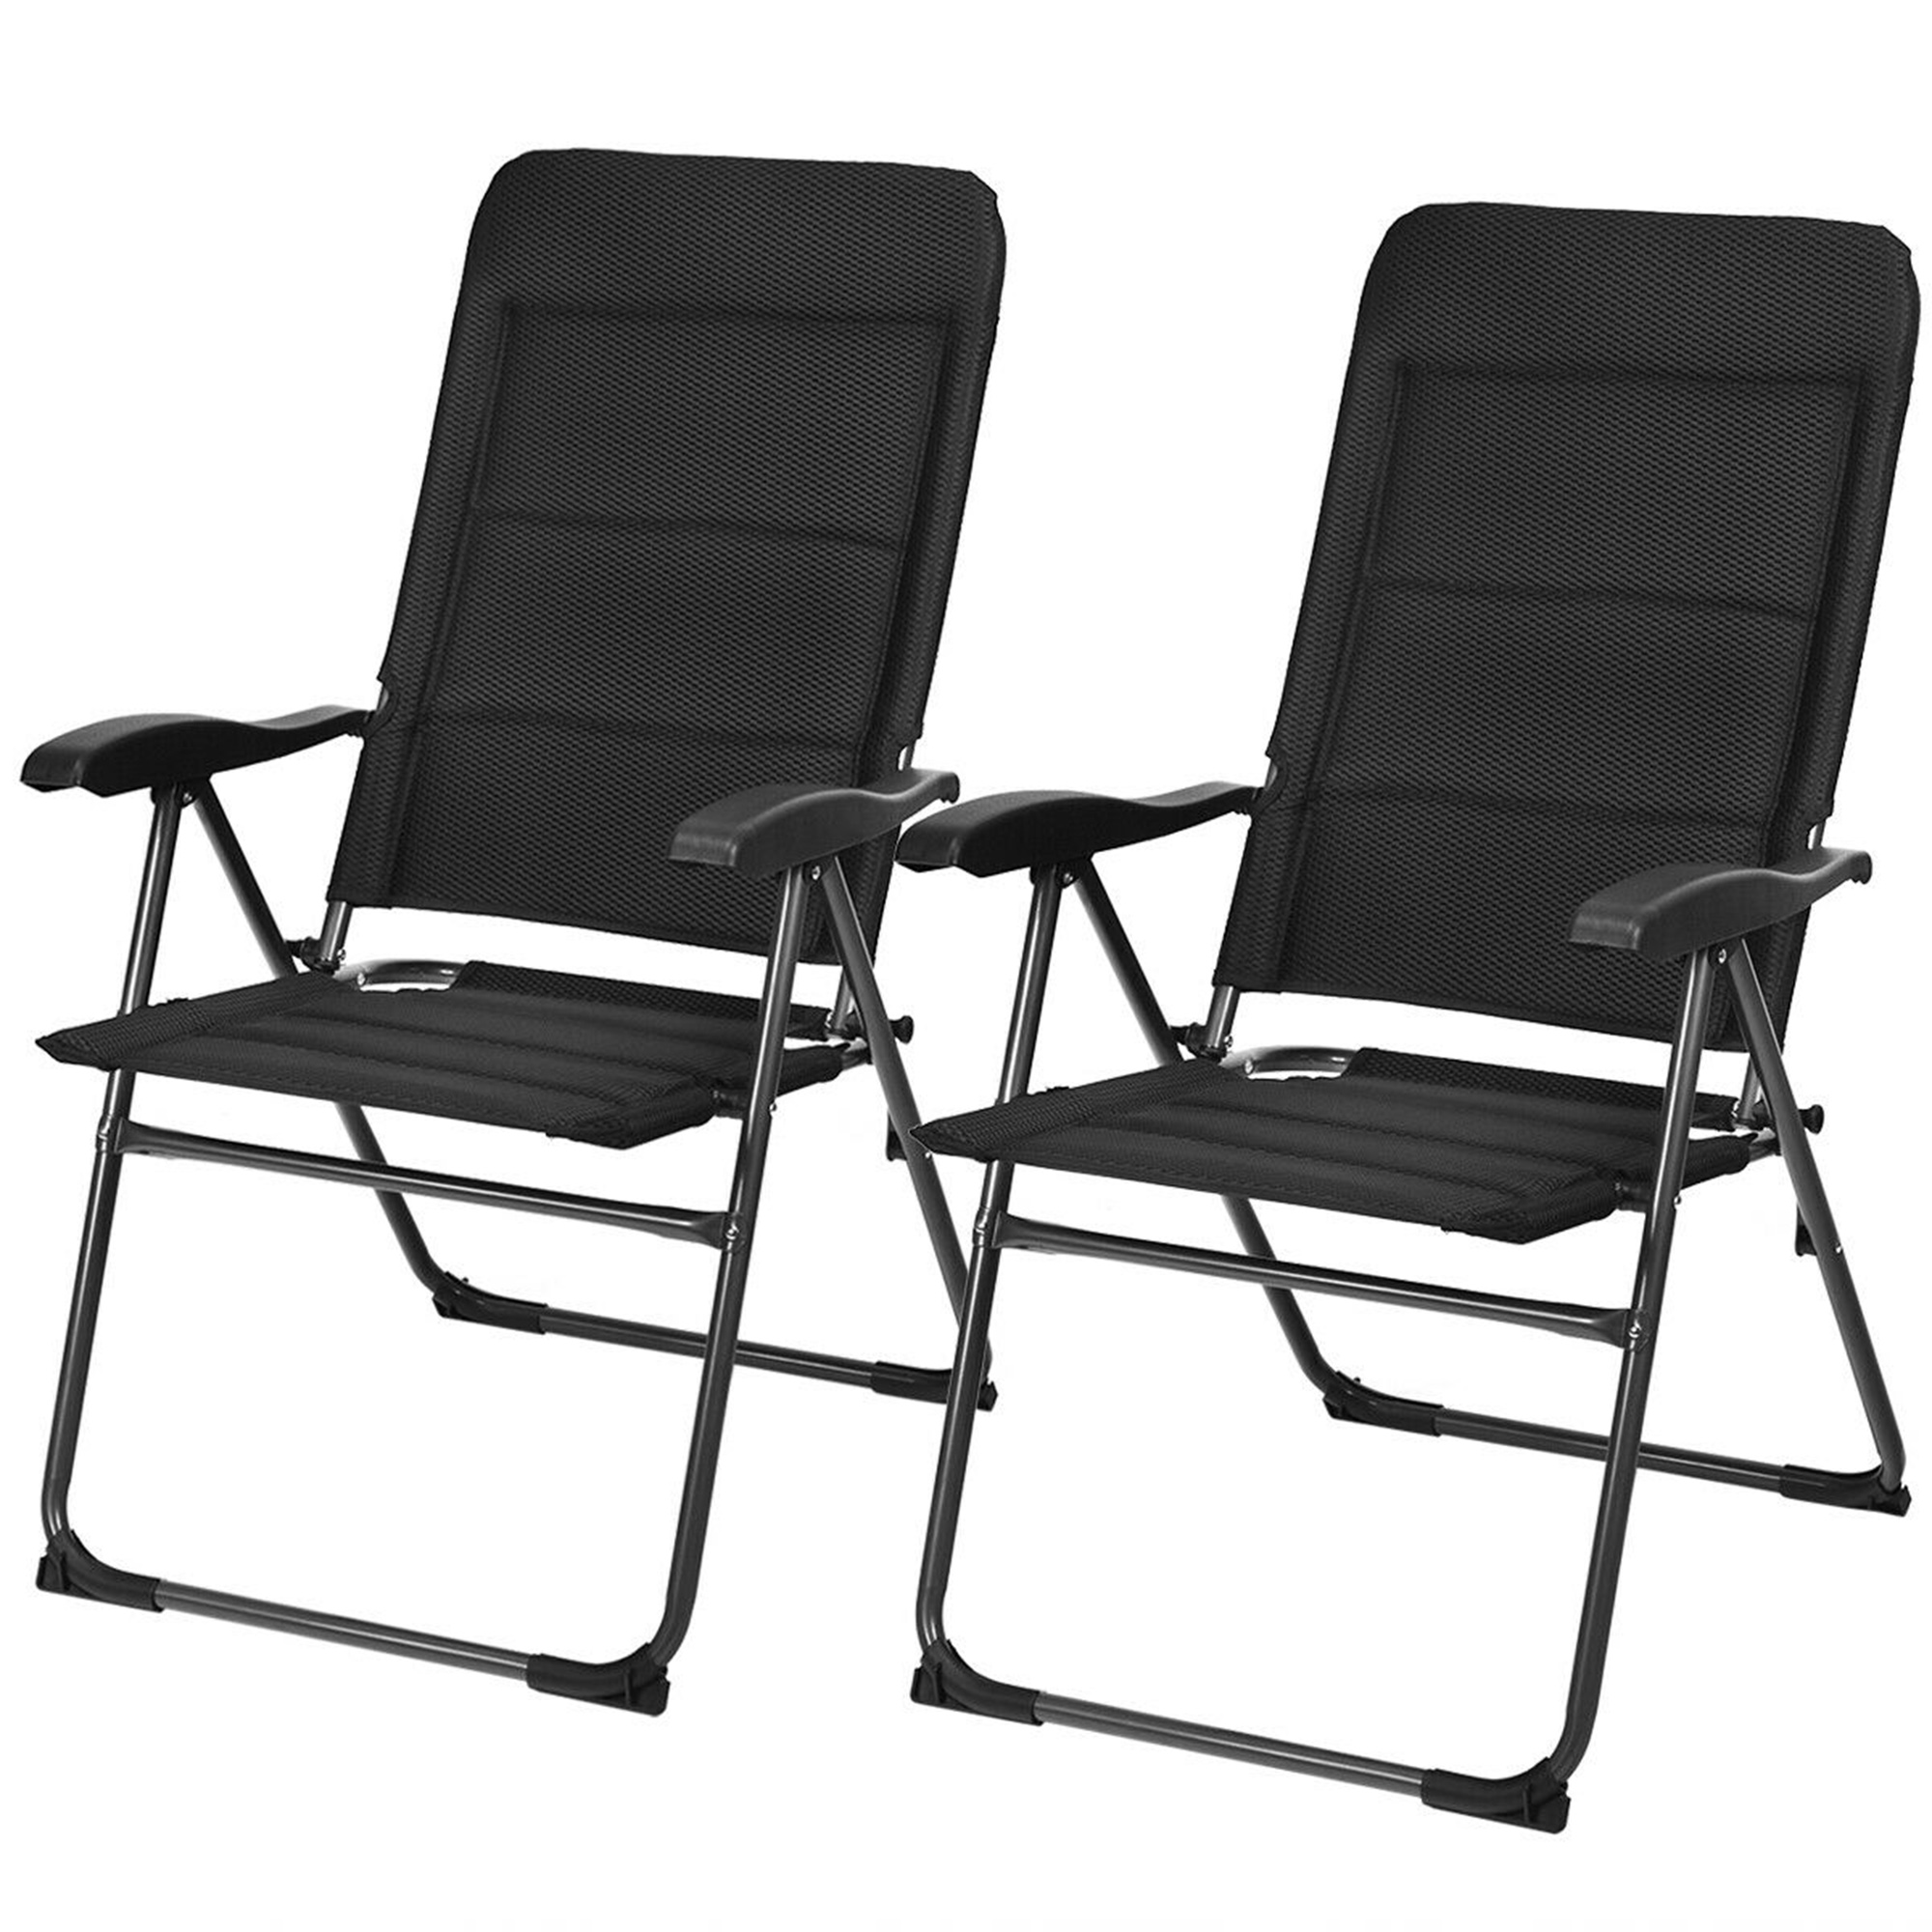 Gymax 2PCS Patio Folding Chairs Back Adjustable Reclining Padded Garden Furniture - image 5 of 10